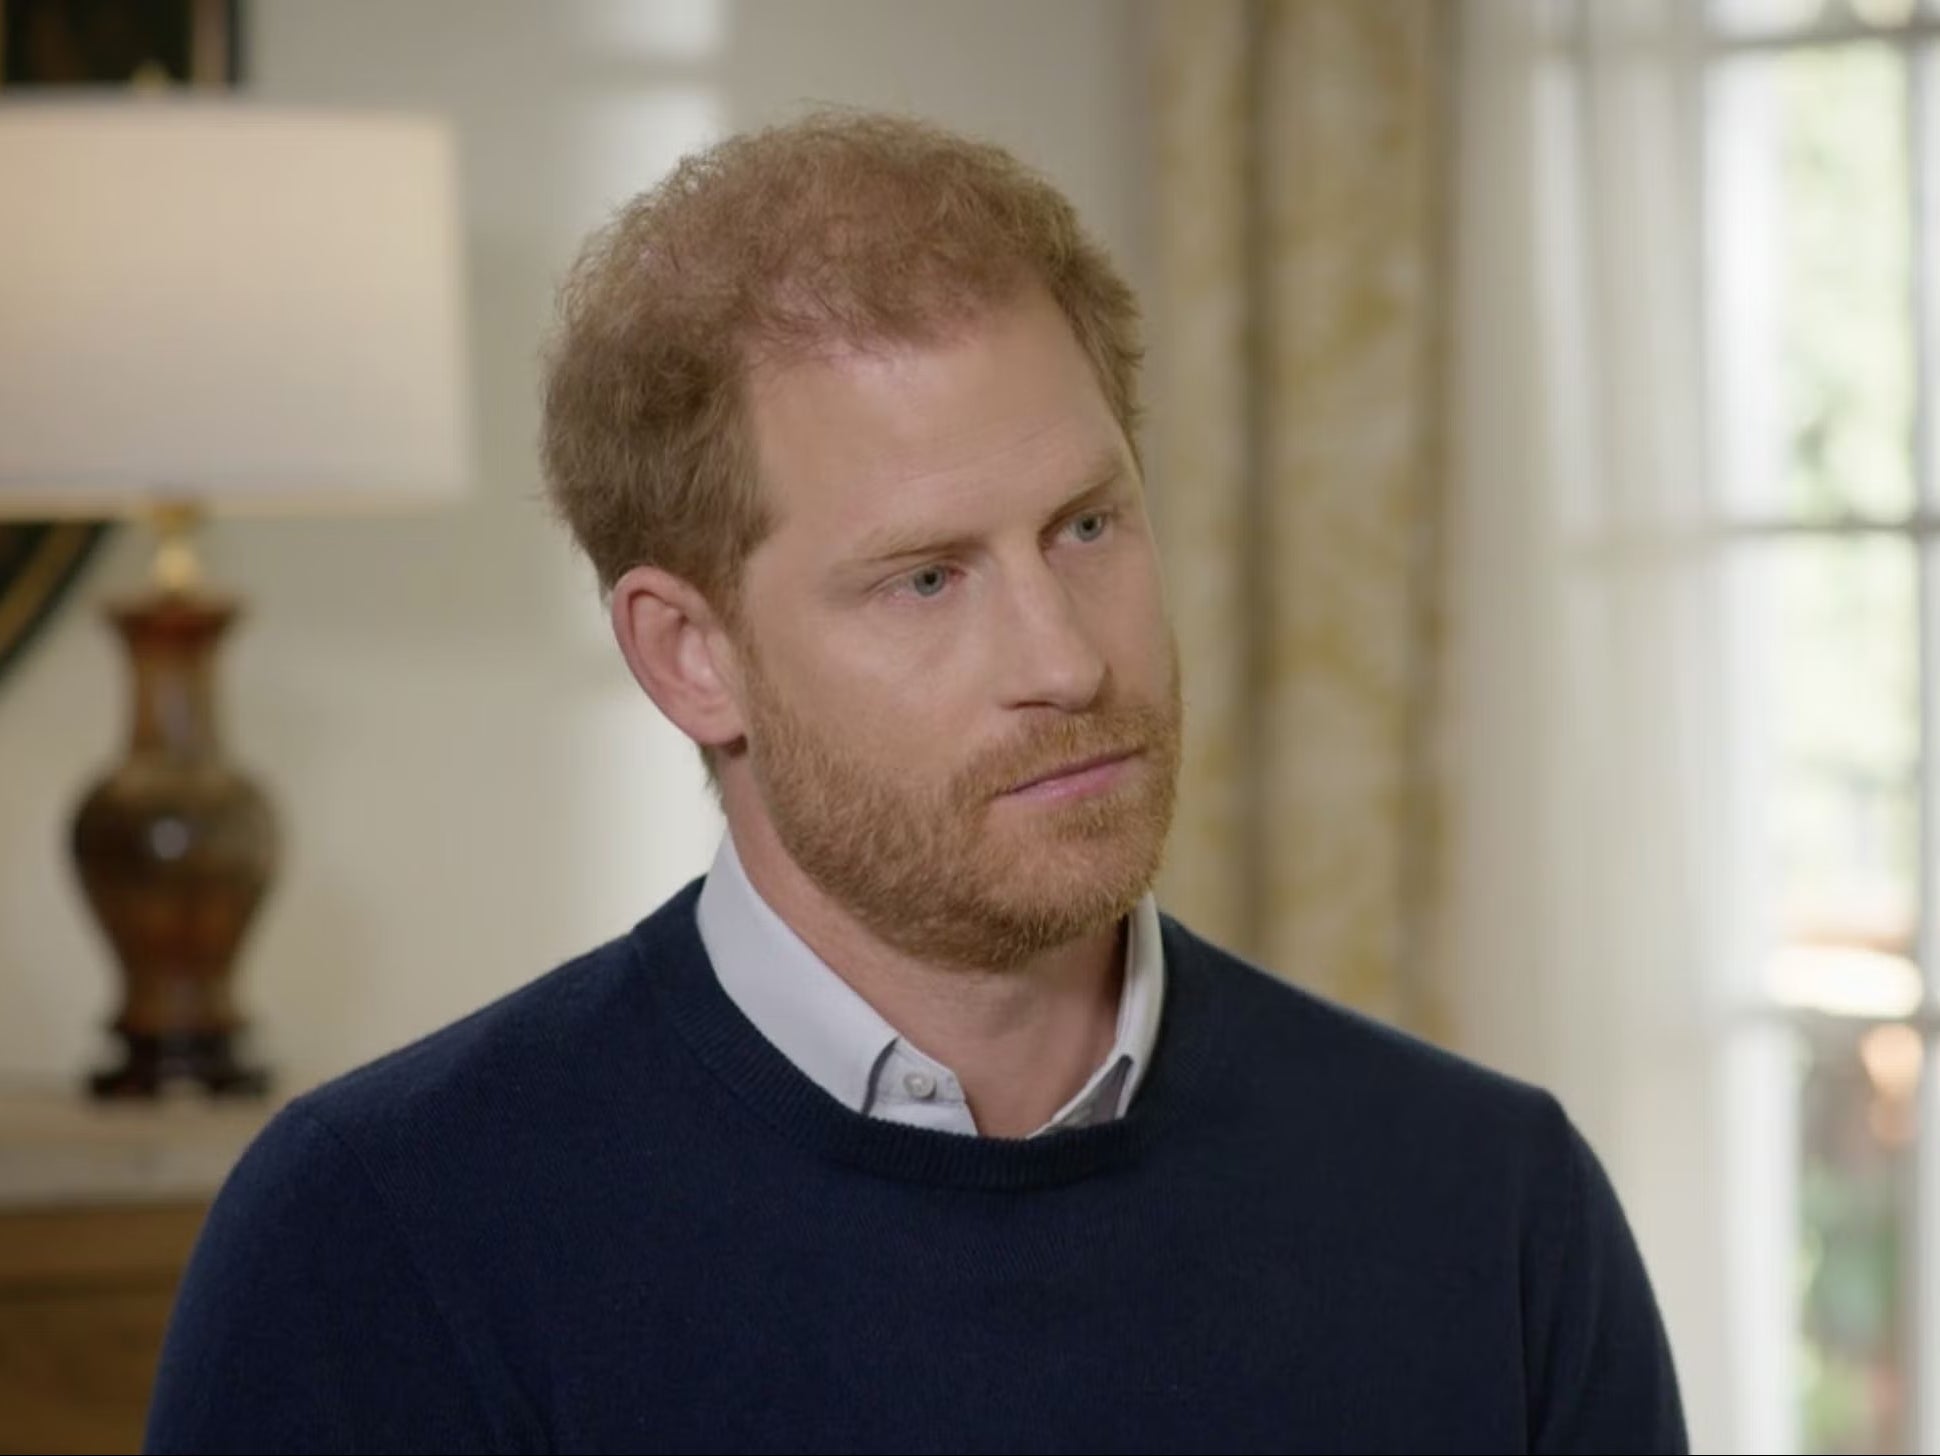 Prince Harry during his interview with Tom Bradby this week